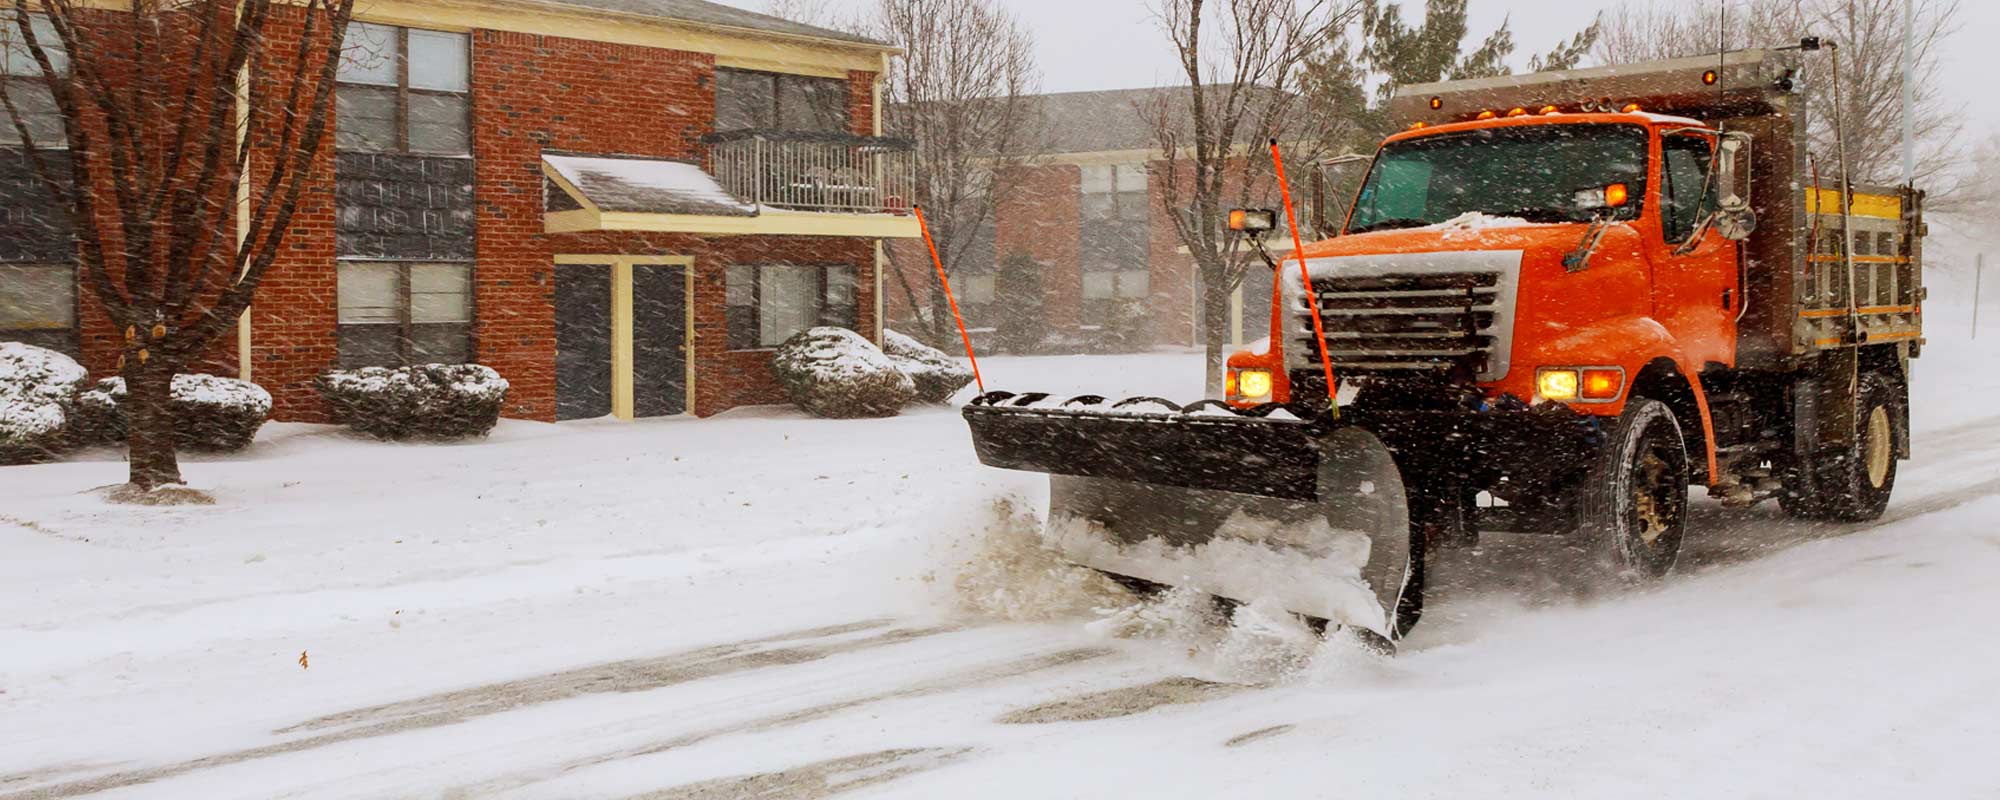 snow plow clearing residential street in snow storm